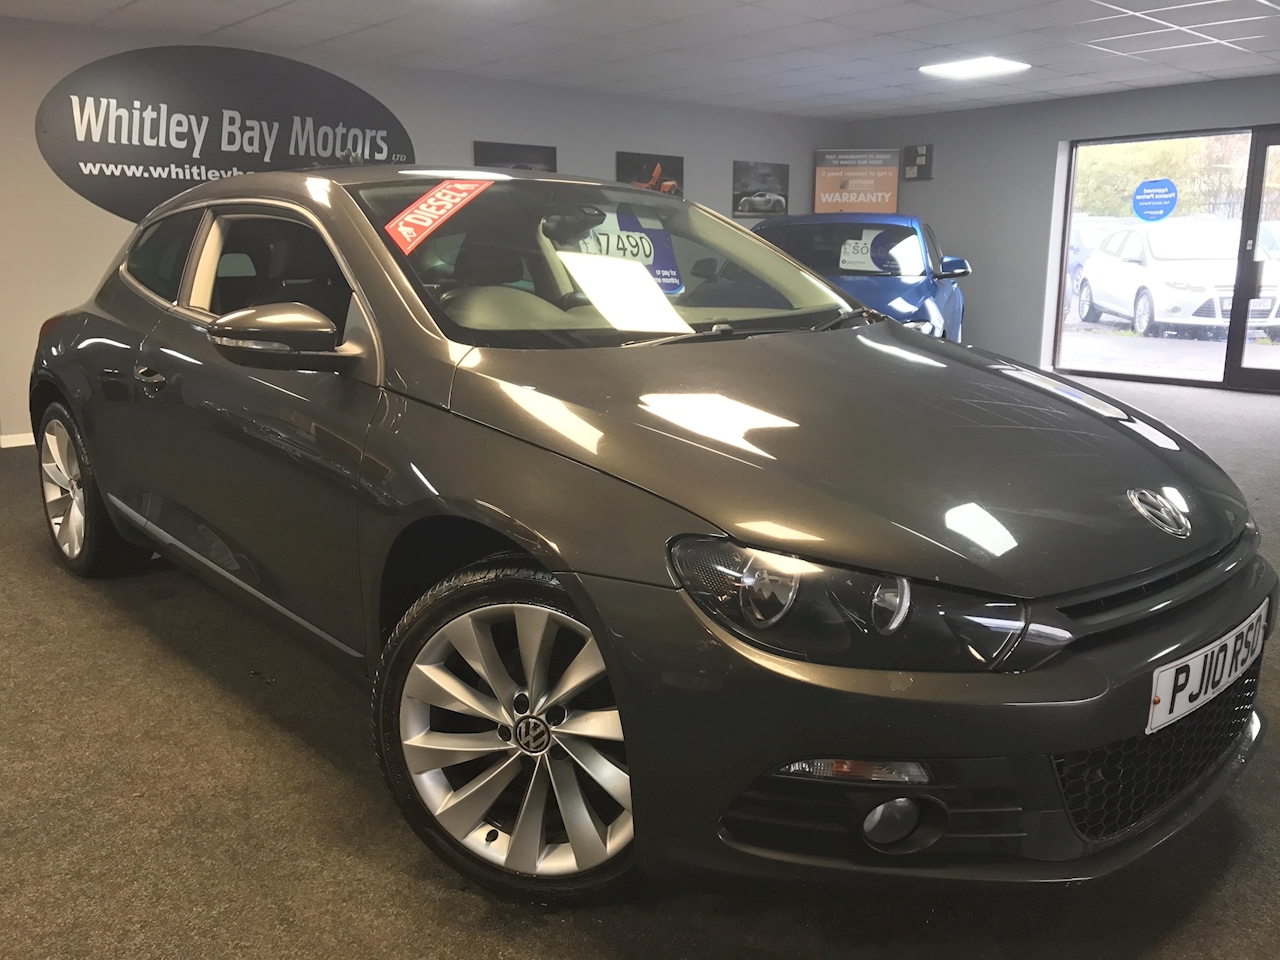 Scirocco Gt Tdi Coupe 2.0 Manual Diesel